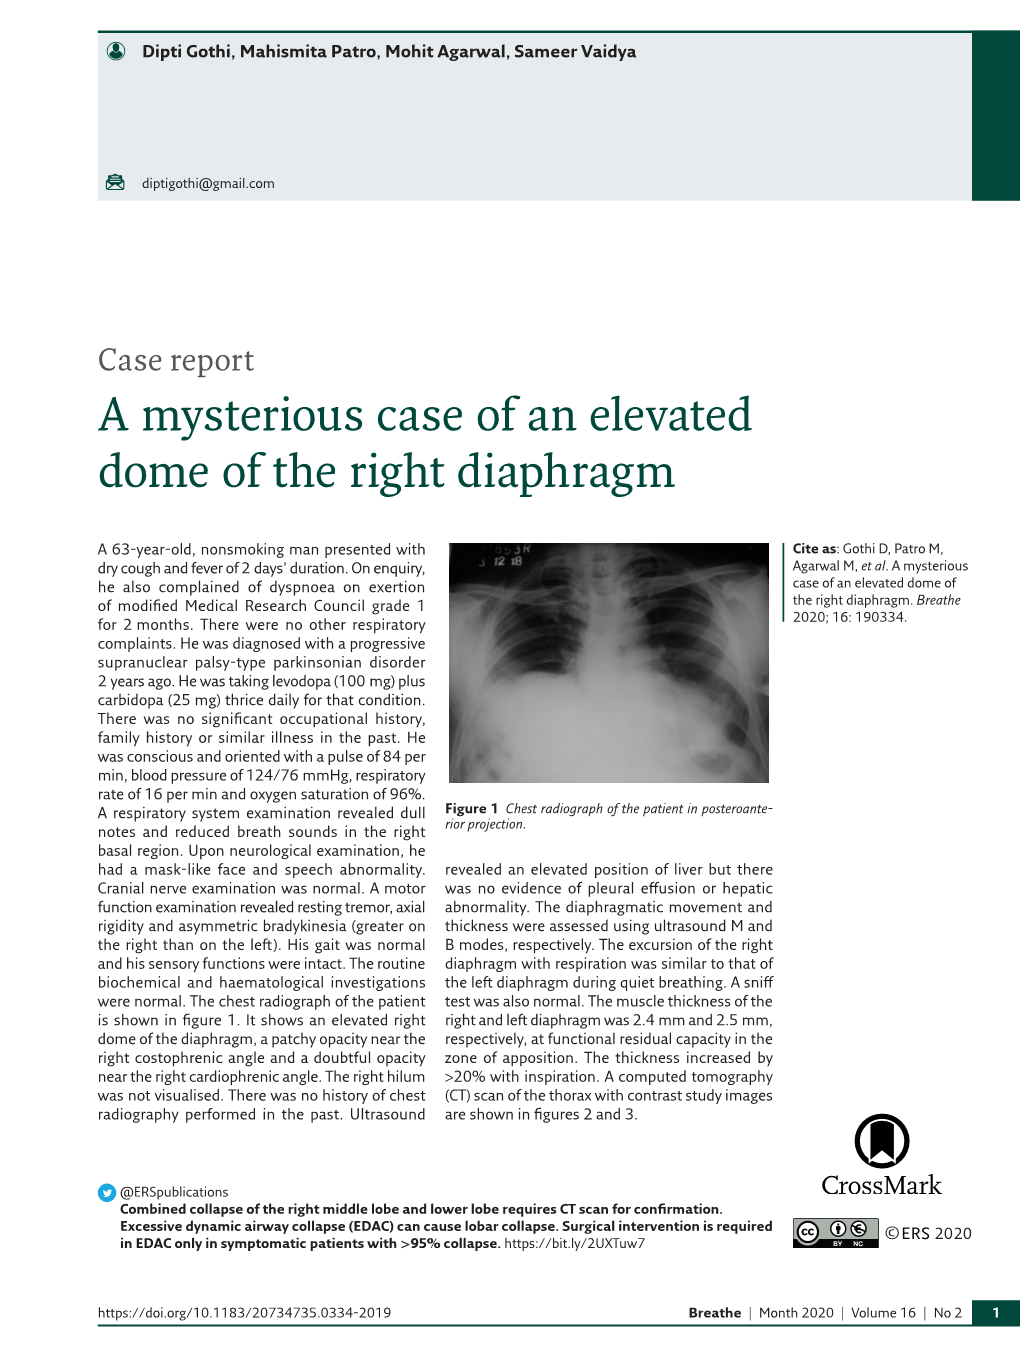 A Mysterious Case of an Elevated Dome of the Right Diaphragm